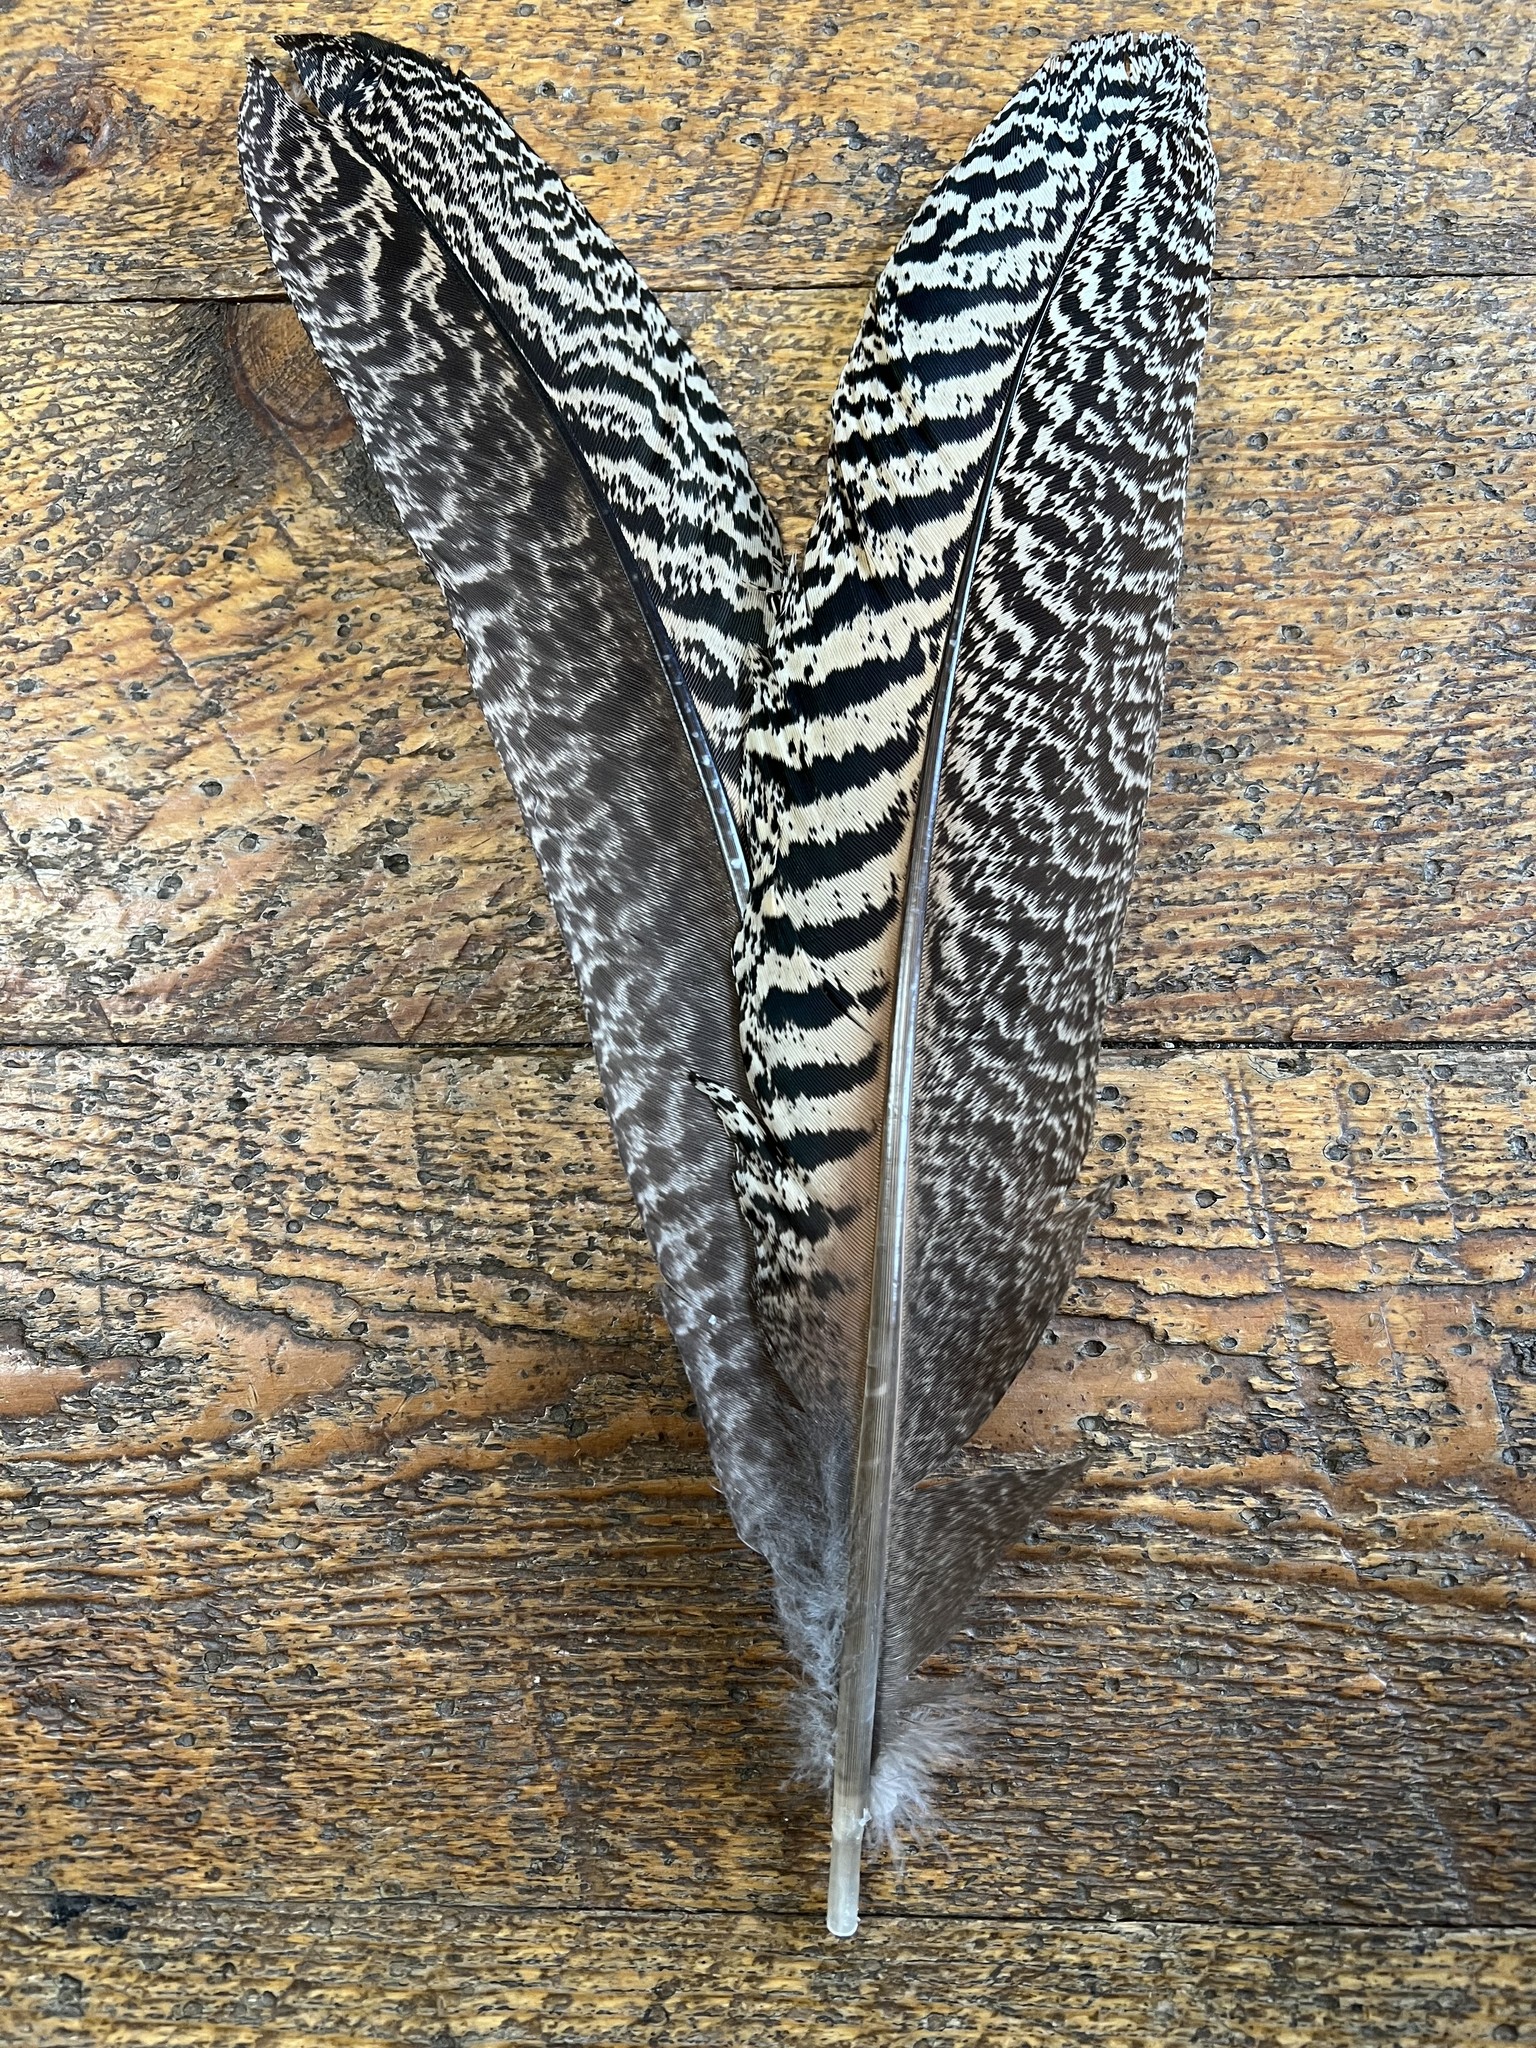 white peacock wing feathers